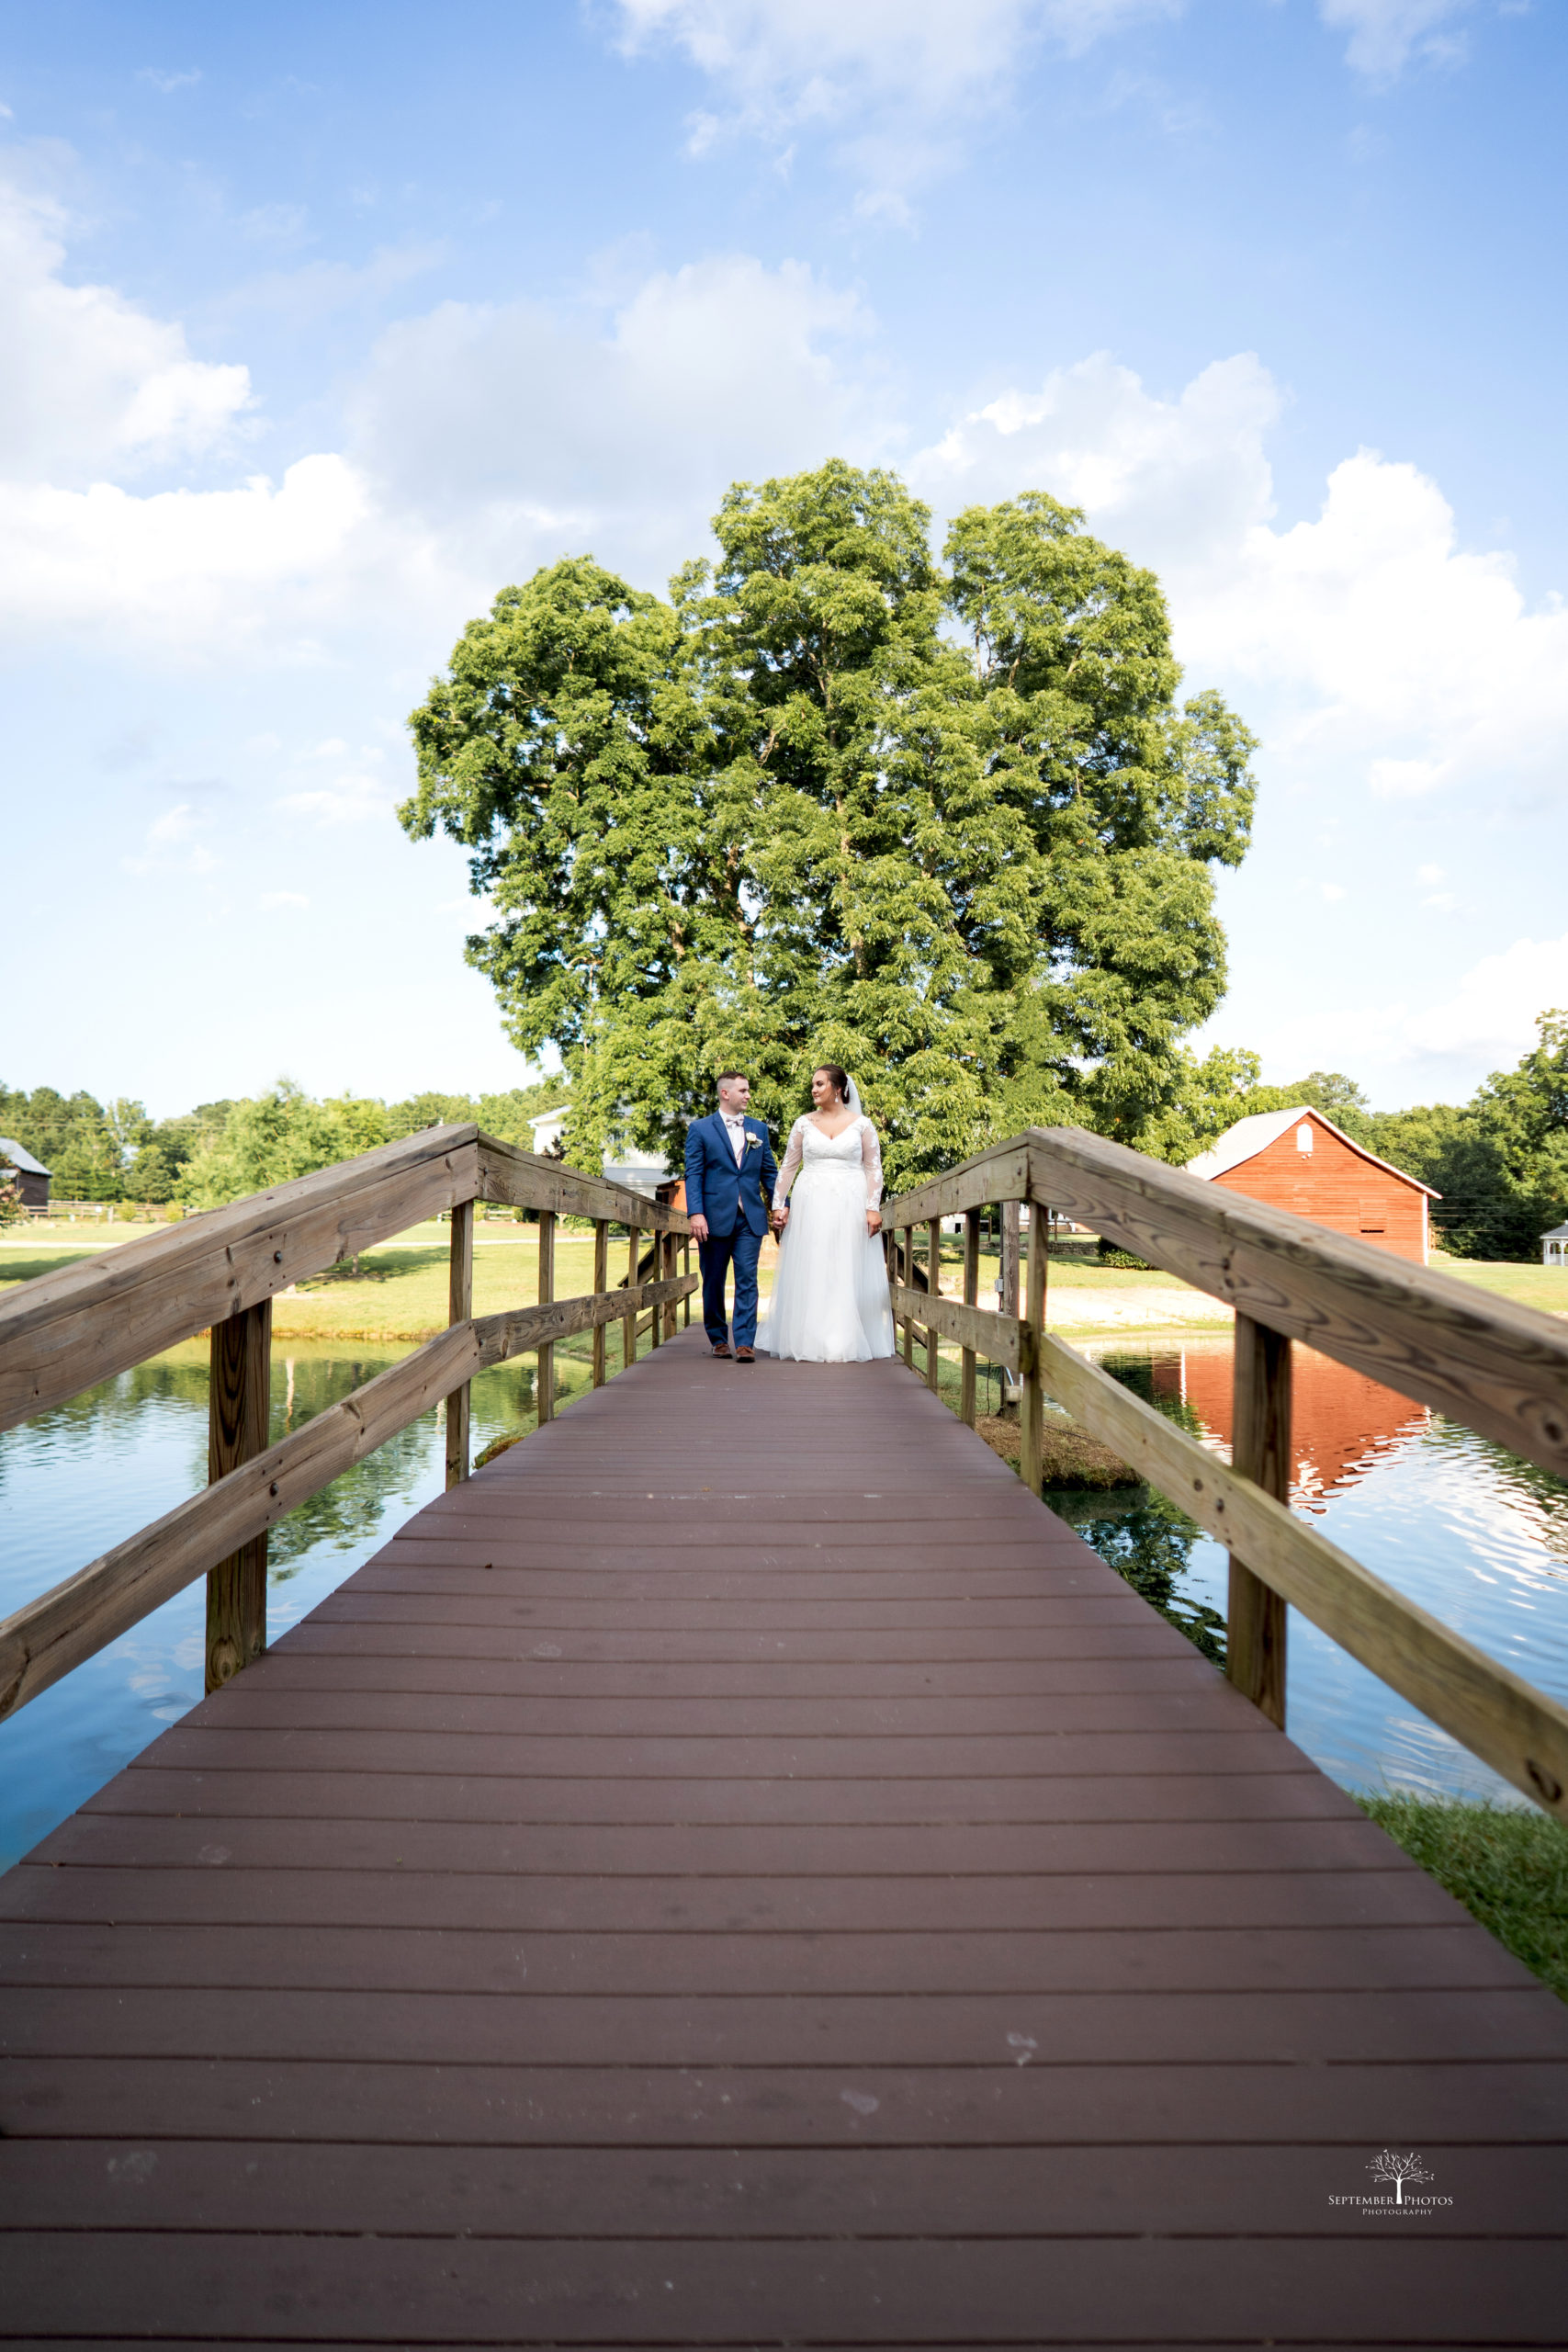 The beautiful couple getting photos on the bridge for their blush and gold wedding at Walnut Hill.